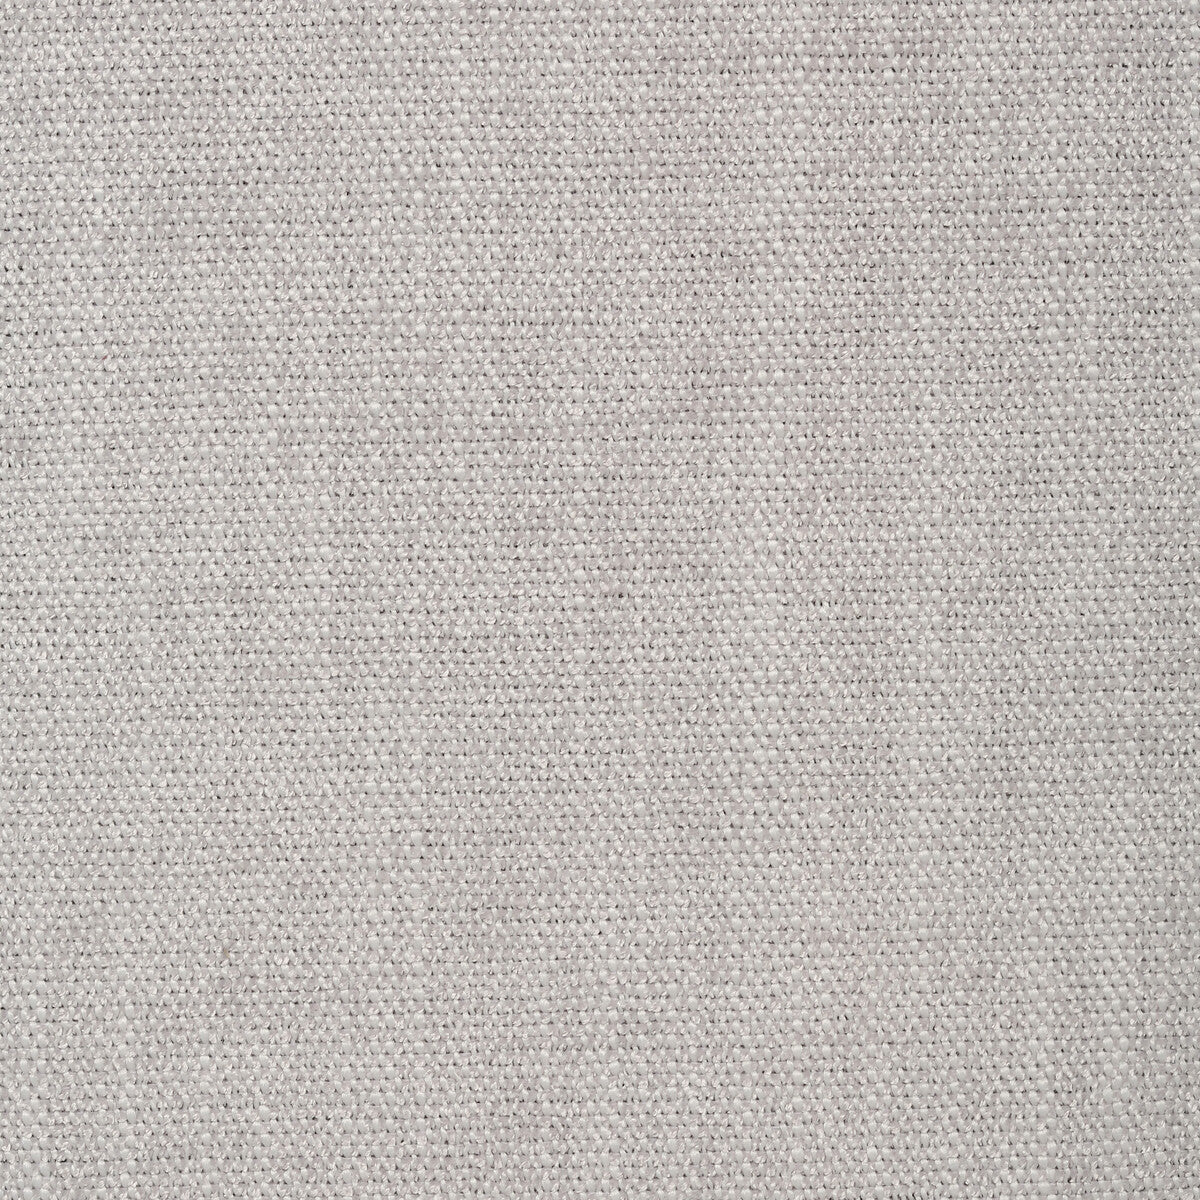 Kravet Contract fabric in 35114-11 color - pattern 35114.11.0 - by Kravet Contract in the Crypton Incase collection